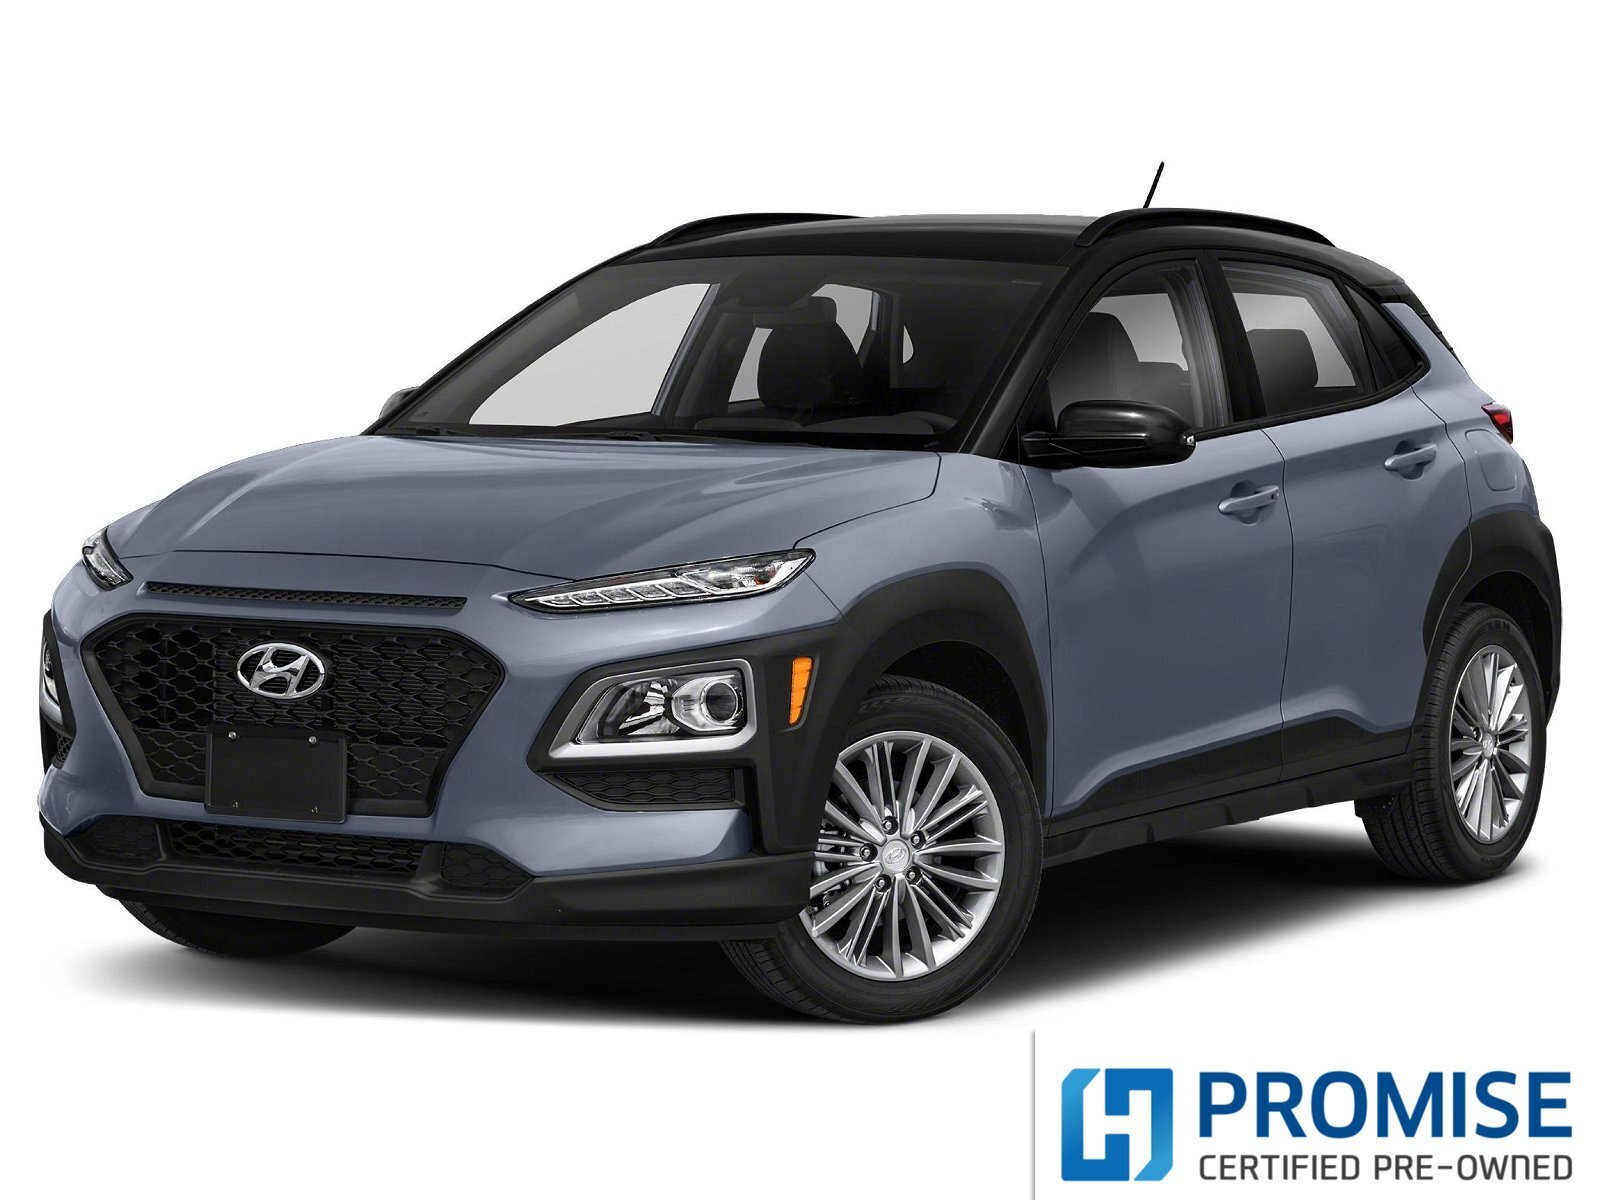 2021 Hyundai Kona Trend Coming Soon | Certified | 4.99% Available